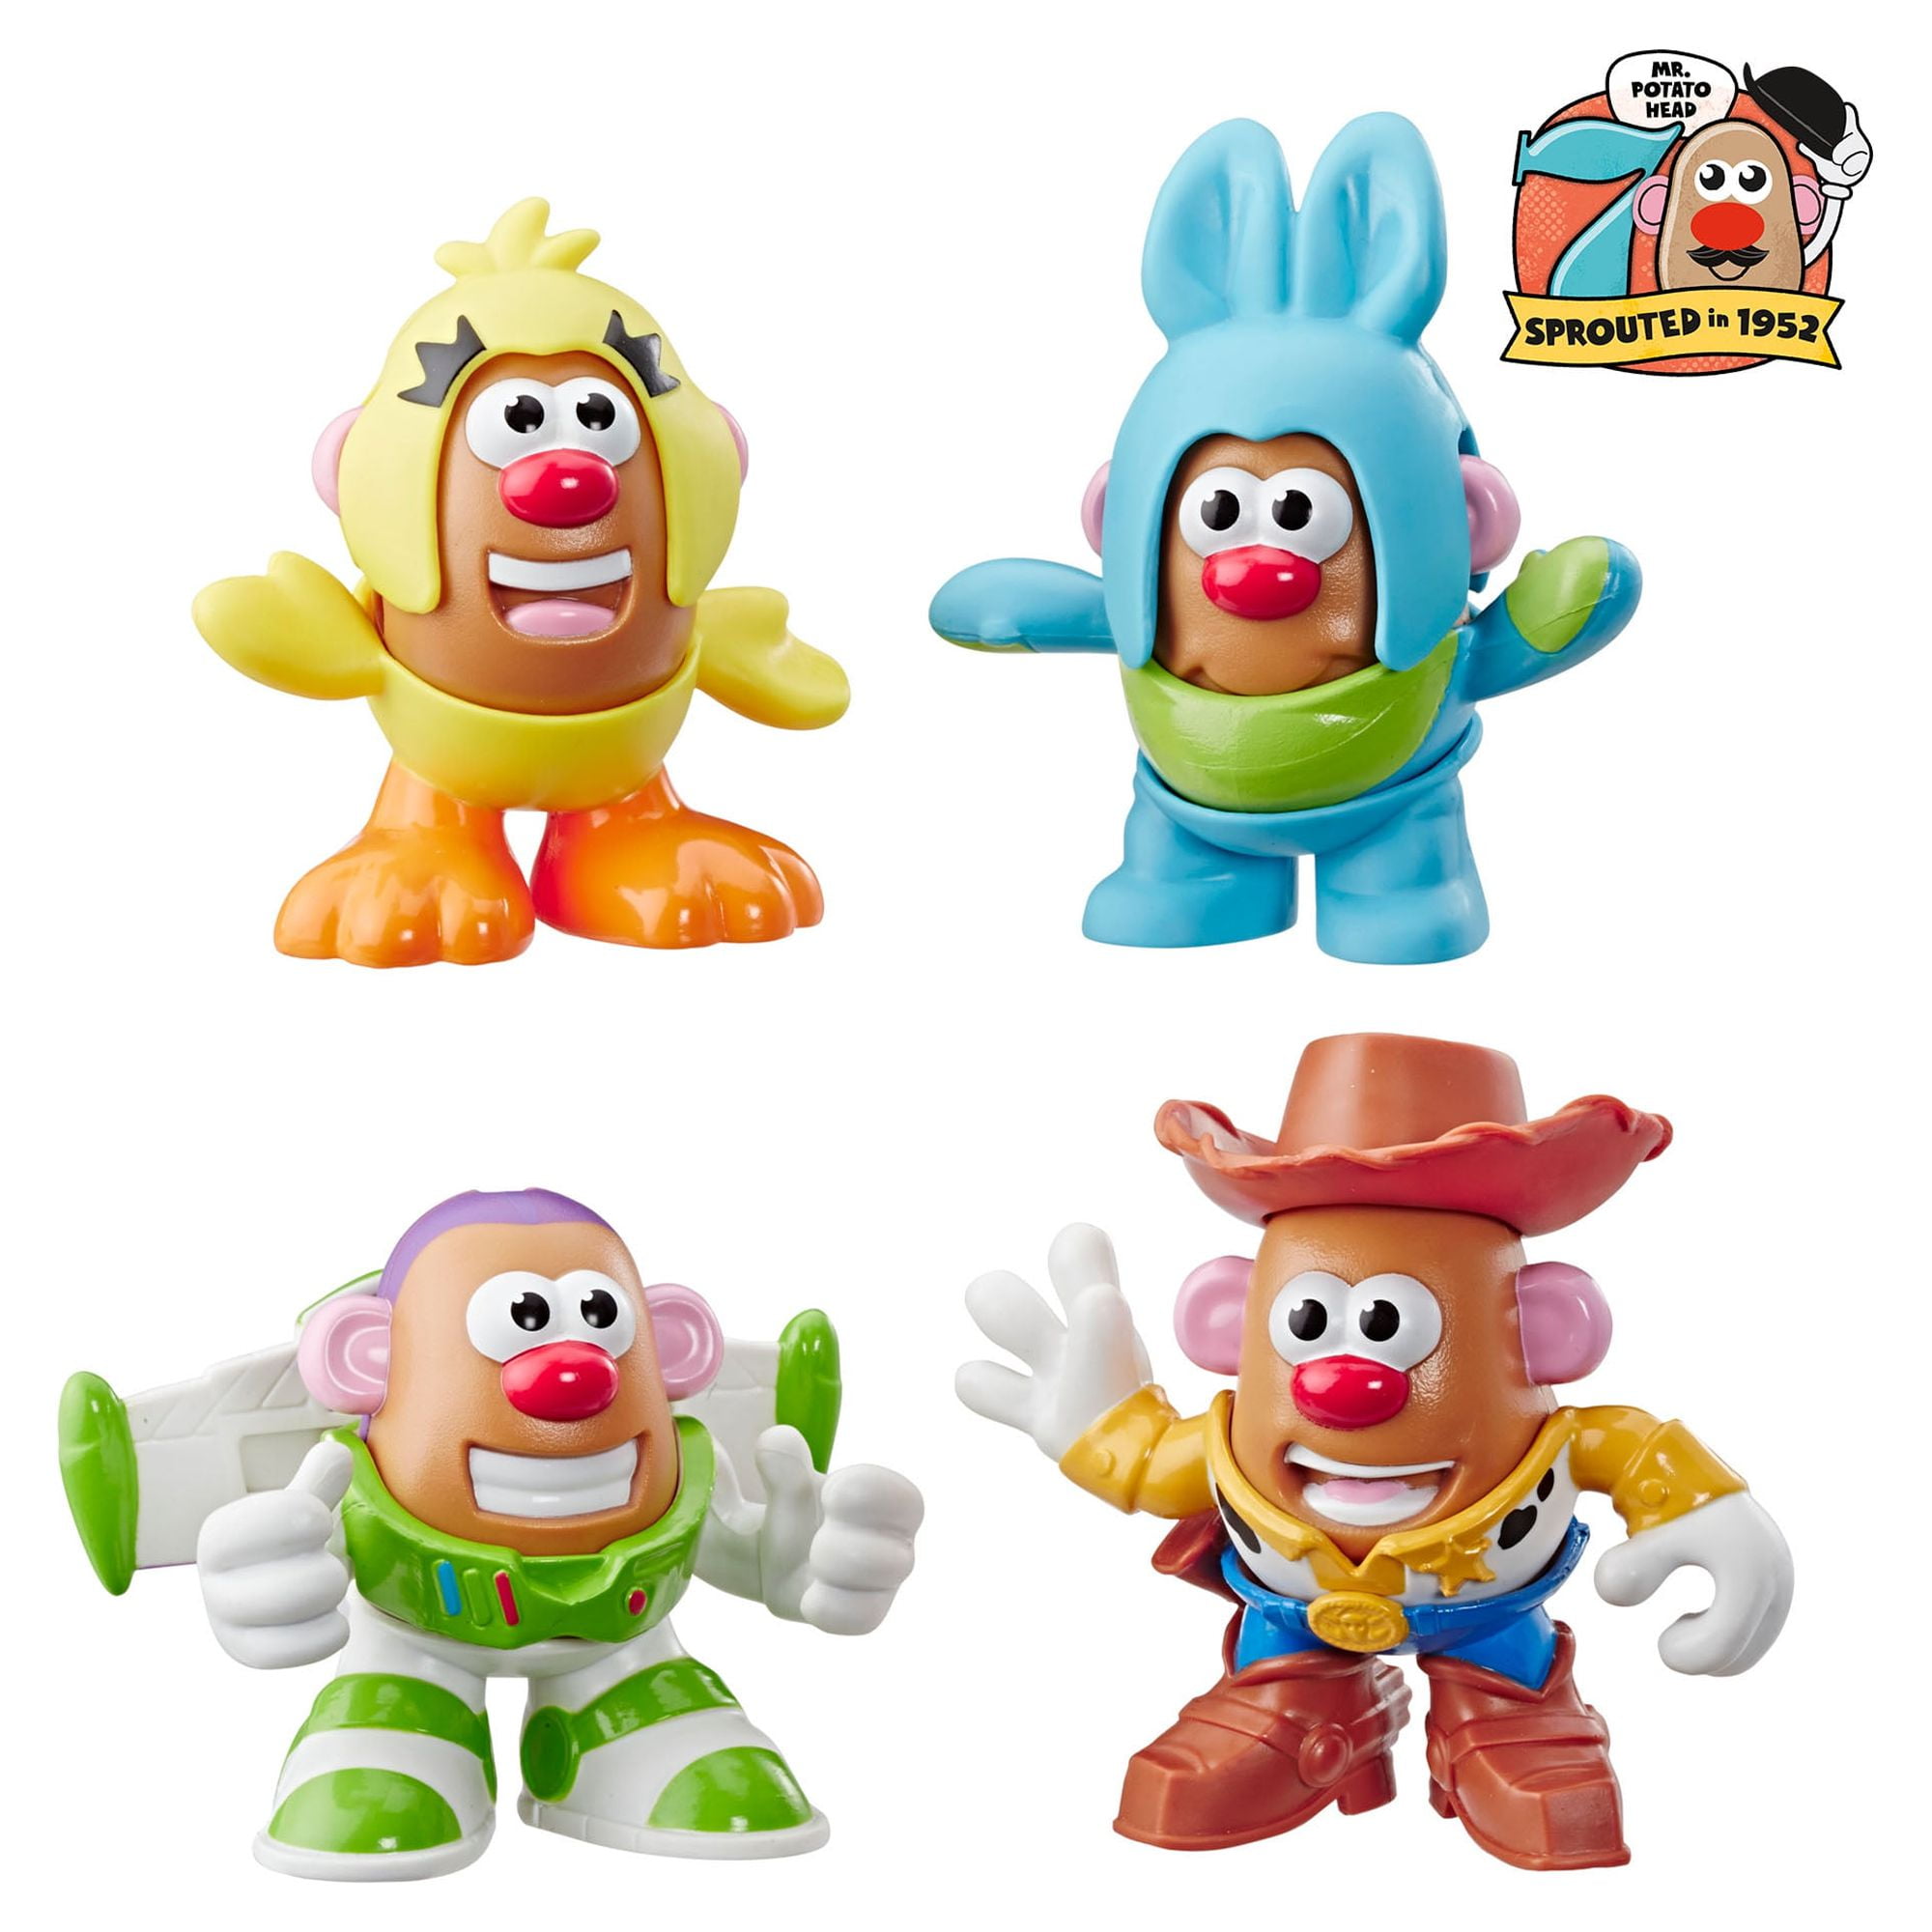 Kid's Deluxe Toy Story 4™ Mrs./Mr. Potato Head Costume - Extra Small